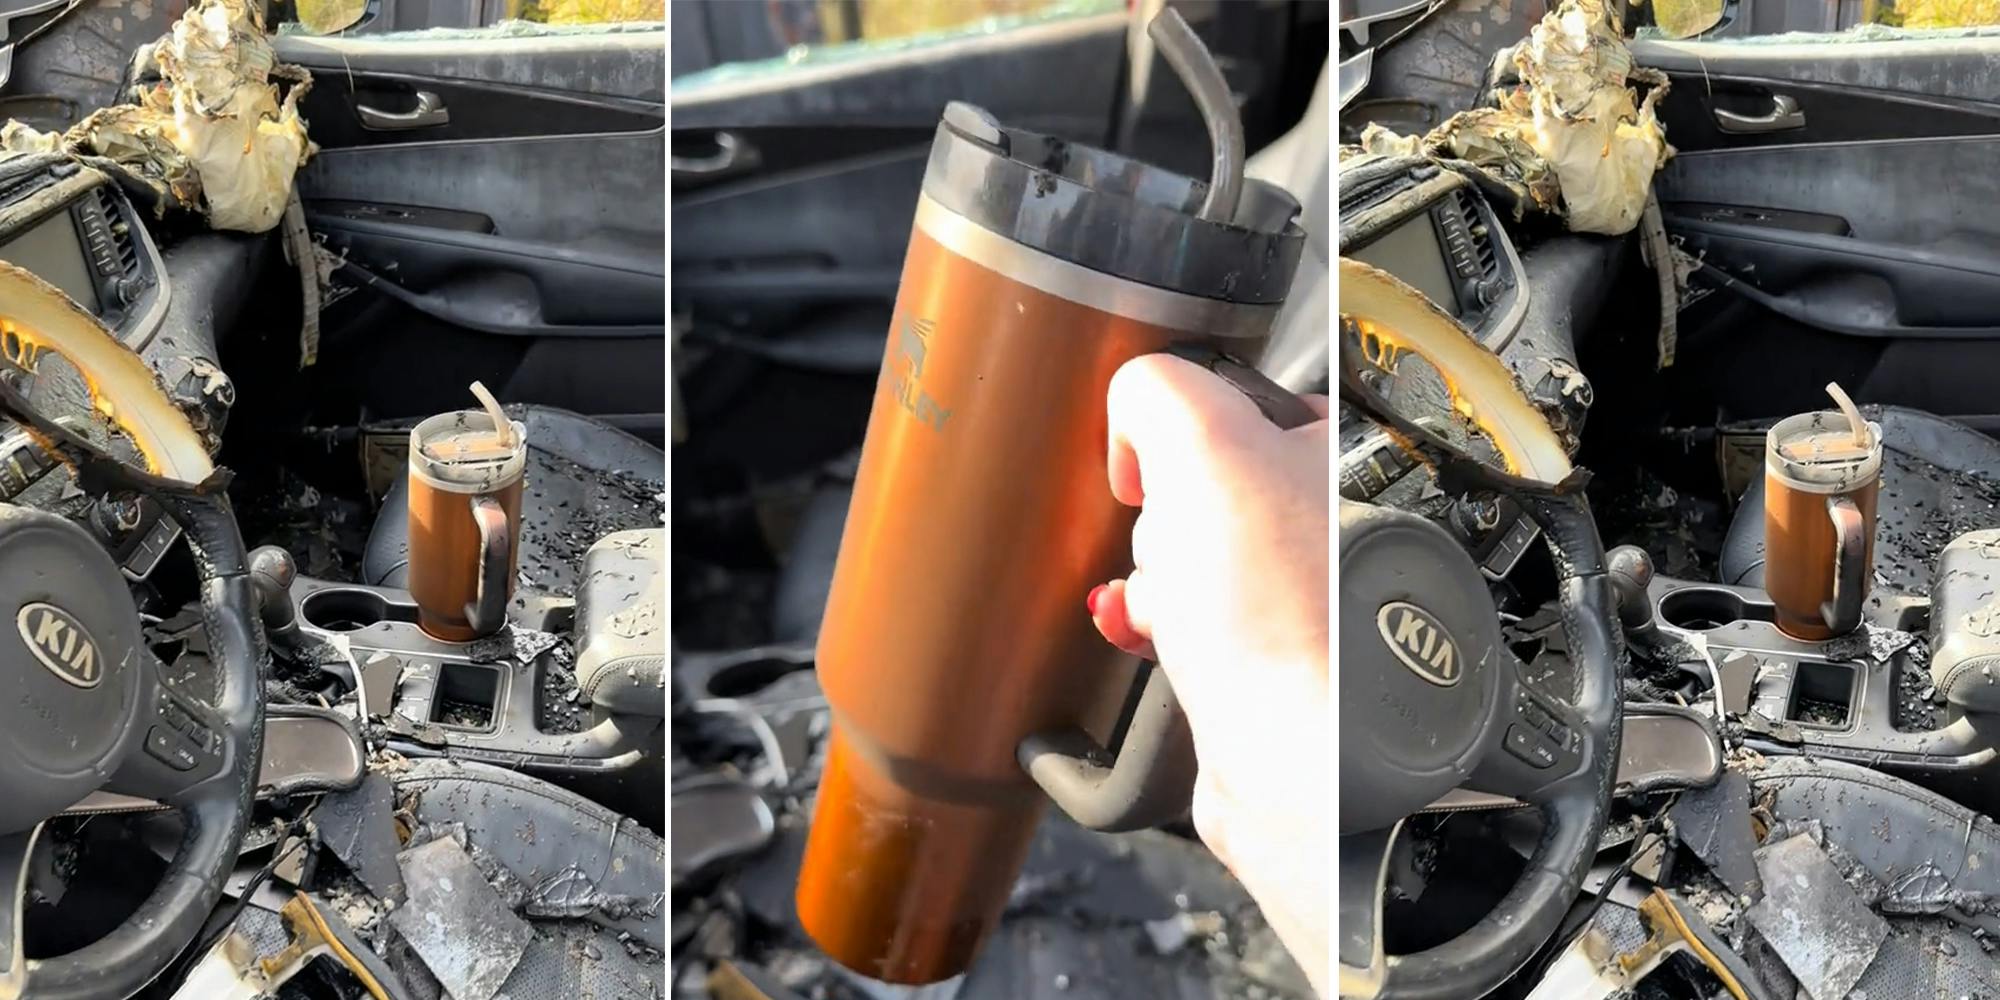 A Stanley tumbler survived a woman's car fire — and the company is buying  her a new vehicle